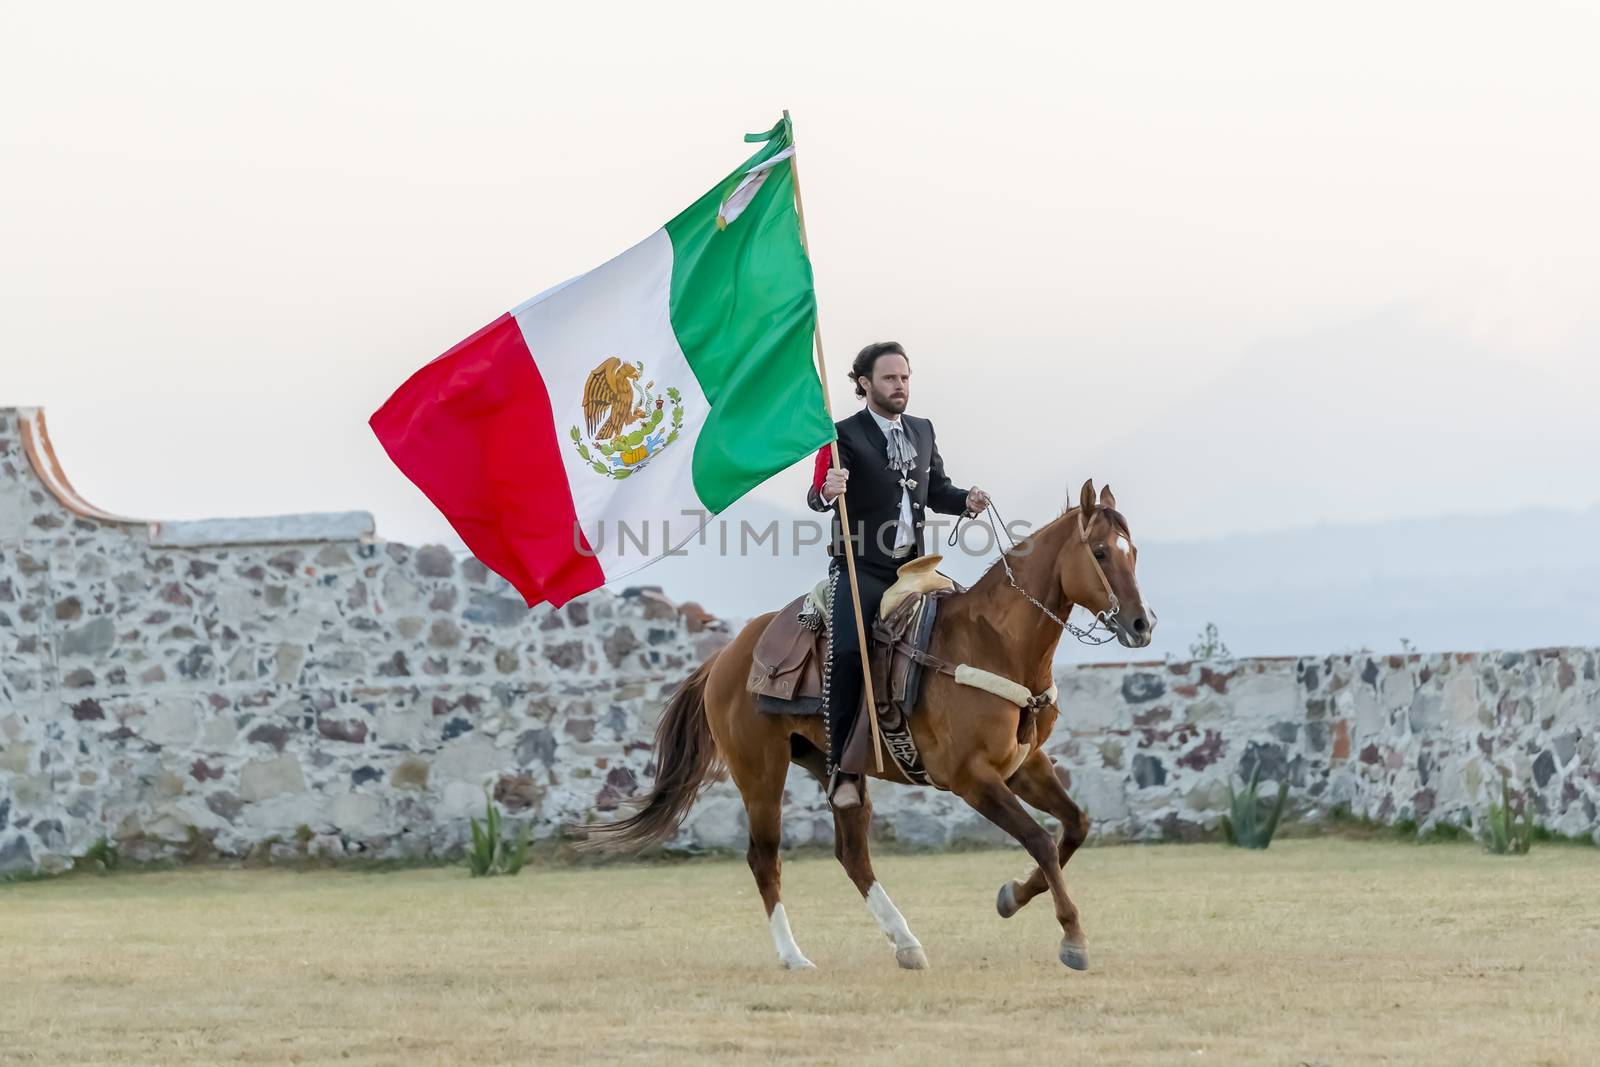 A Very Handsome Mexican Charro Poses In Front Of A Hacienda In The Mexican Countryside While Holding The Mexican Flag by actionsports